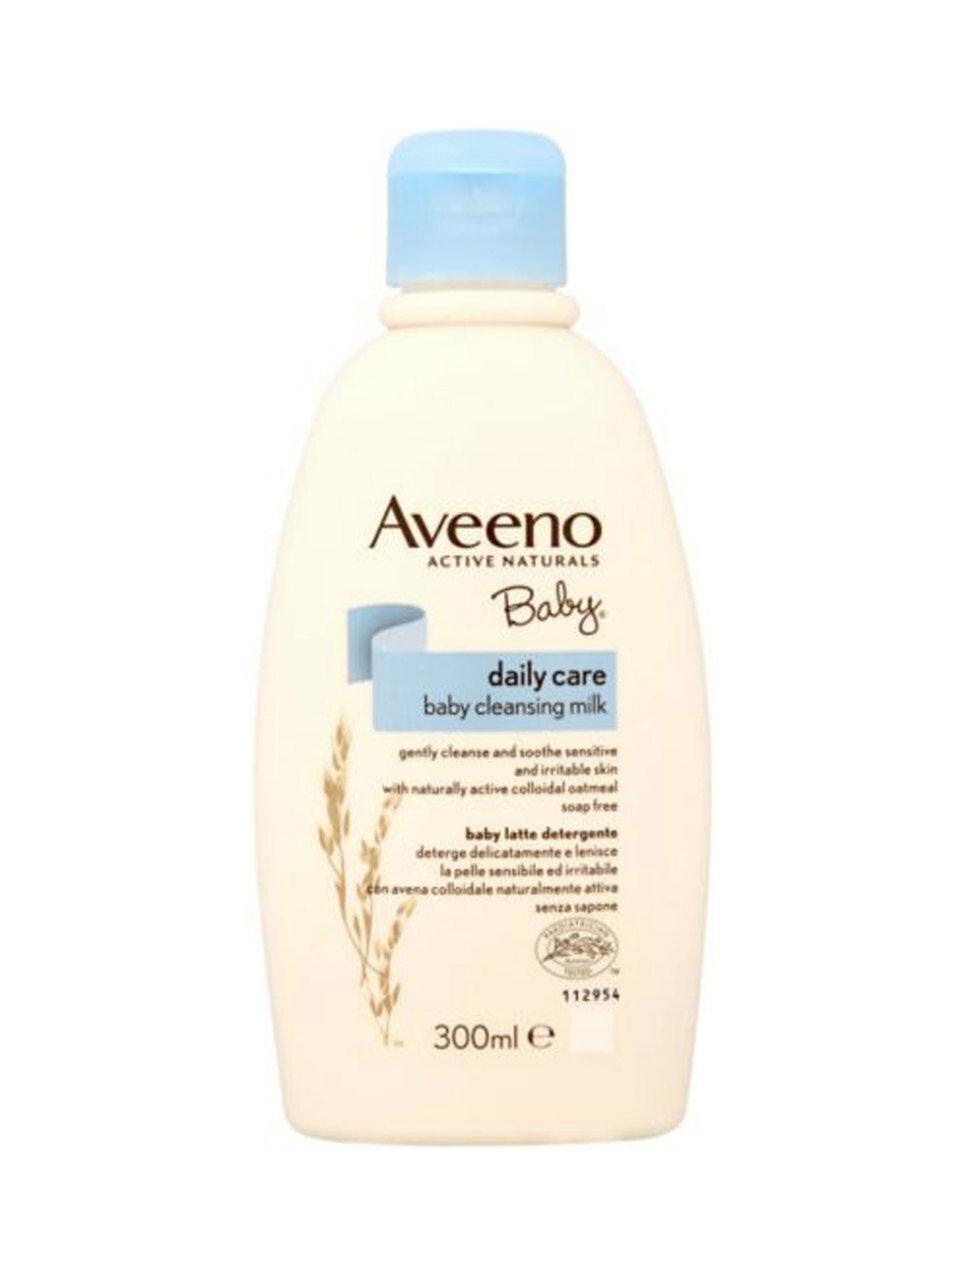 aveeno baby daily care cleansing milk